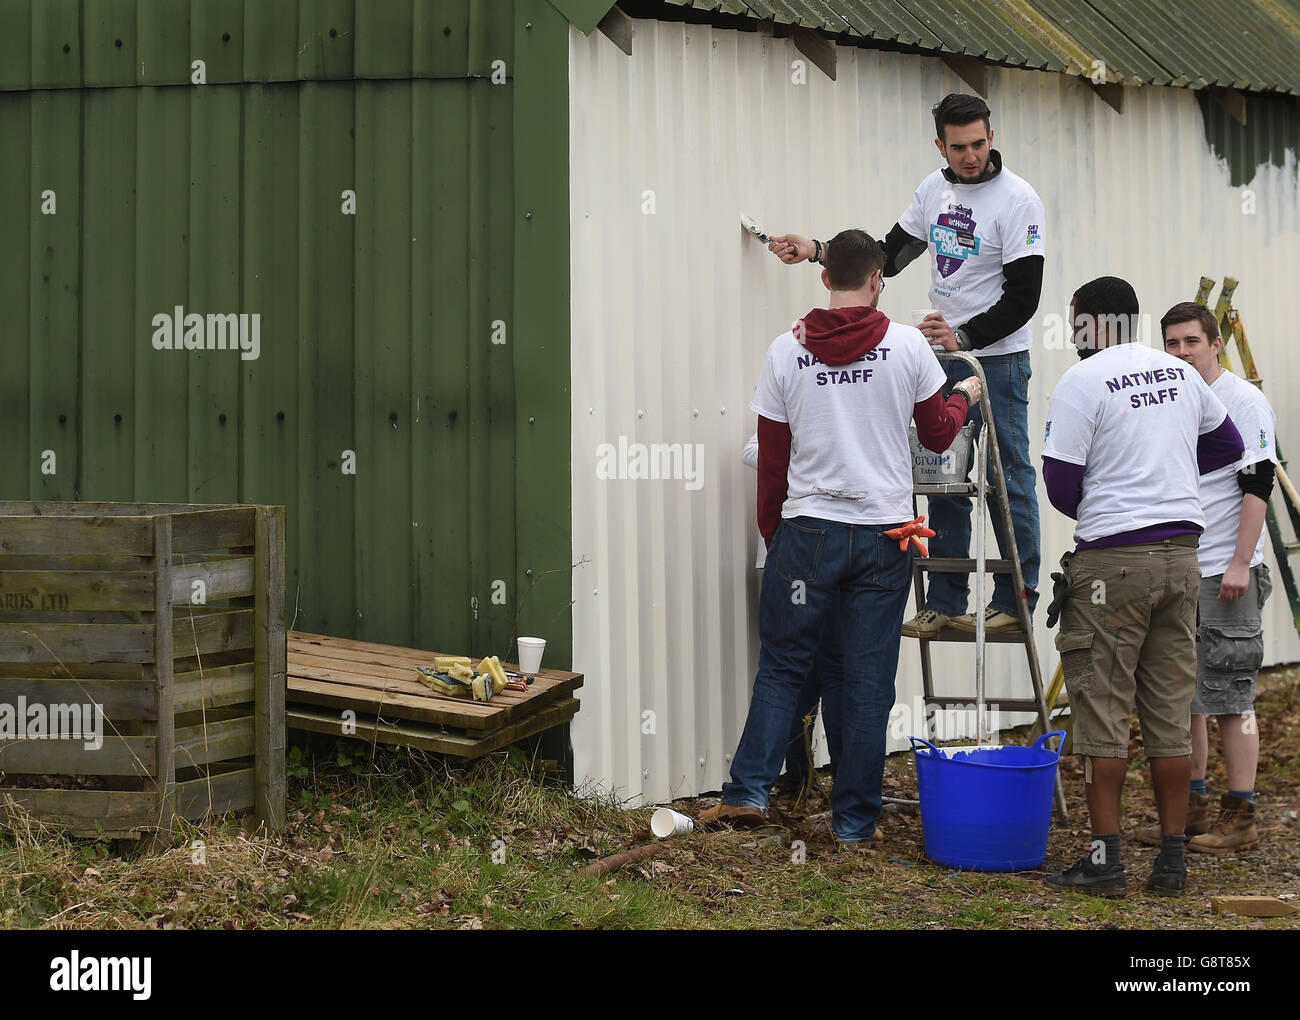 NatWest staff paint an outbuilding during a photocall at Dymock Cricket Club in Gloucestershire. Stock Photo